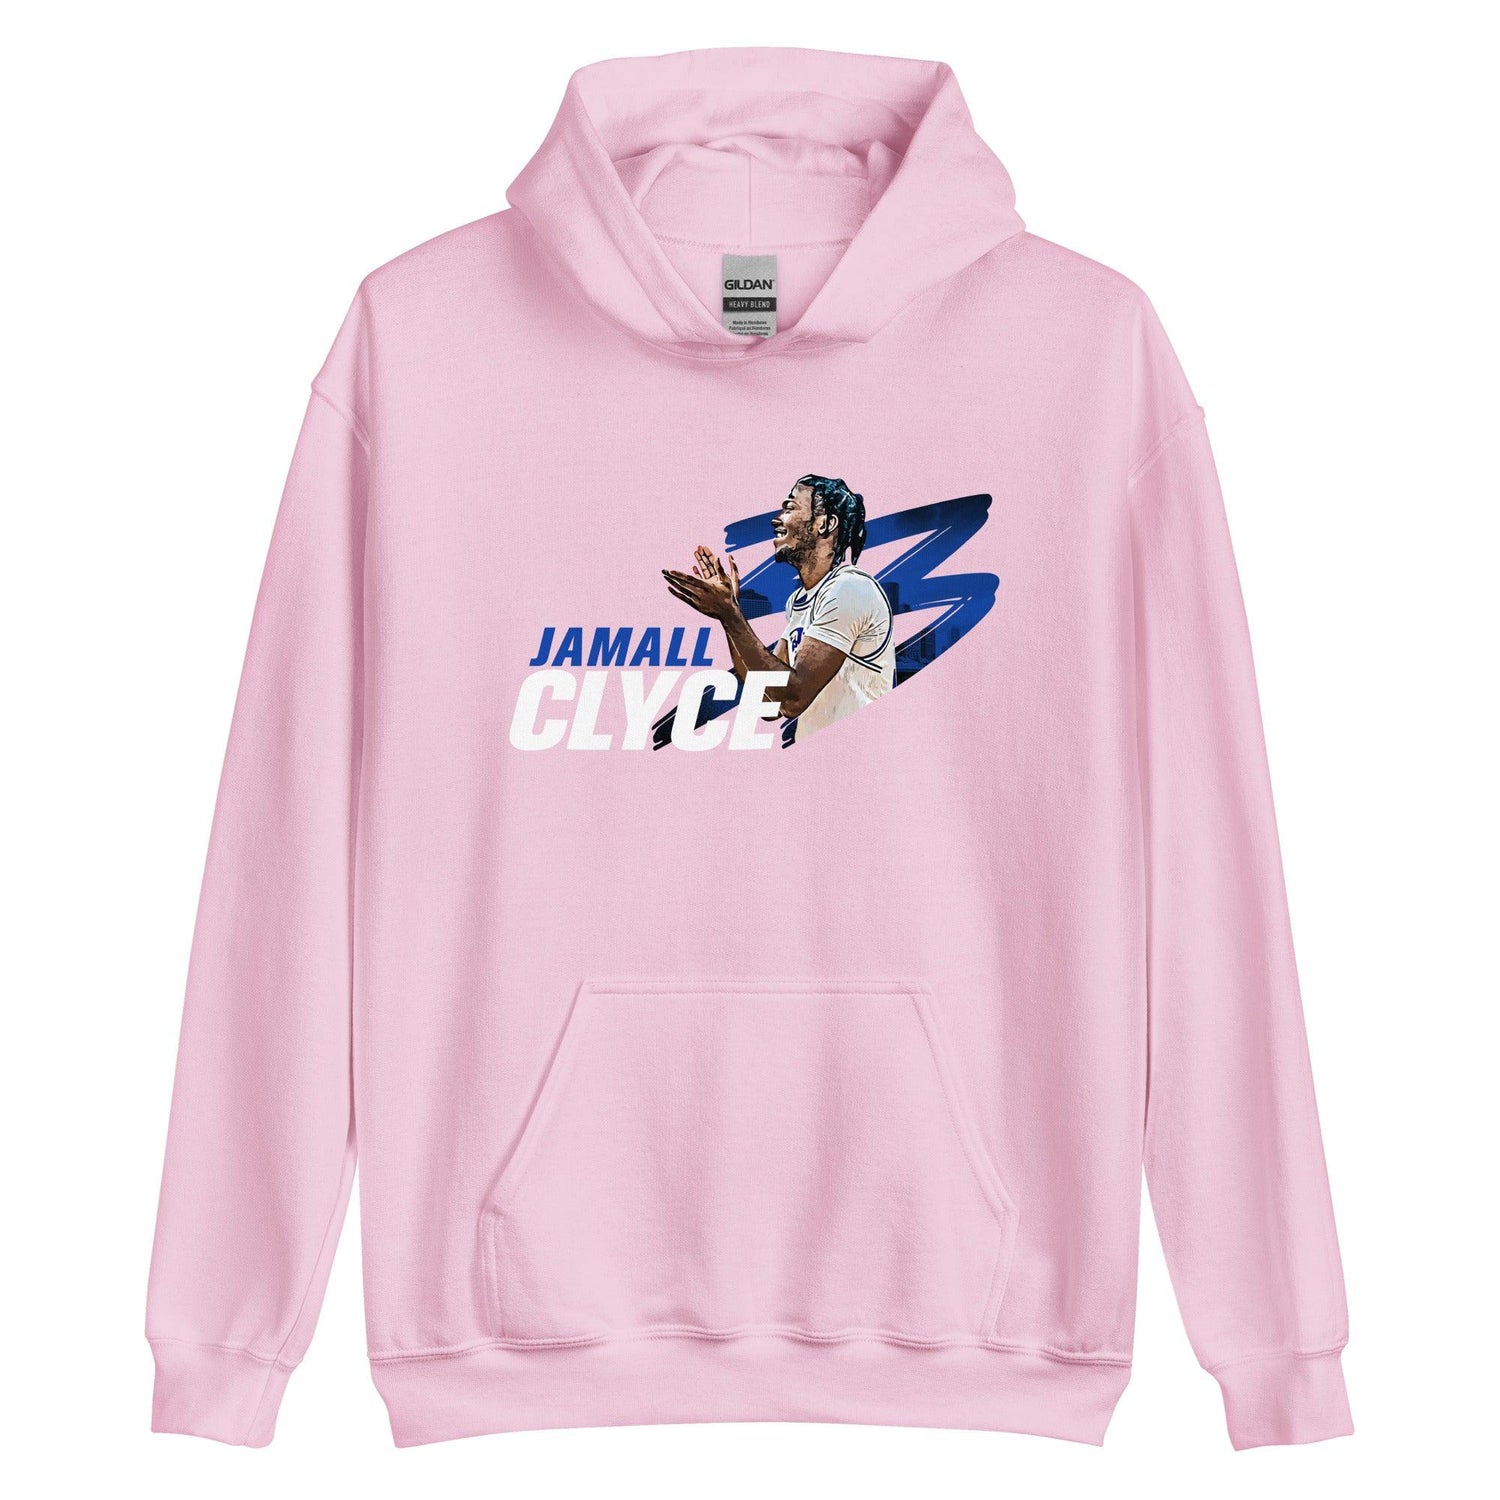 Jamall Clyce "Gameday" Hoodie - Fan Arch